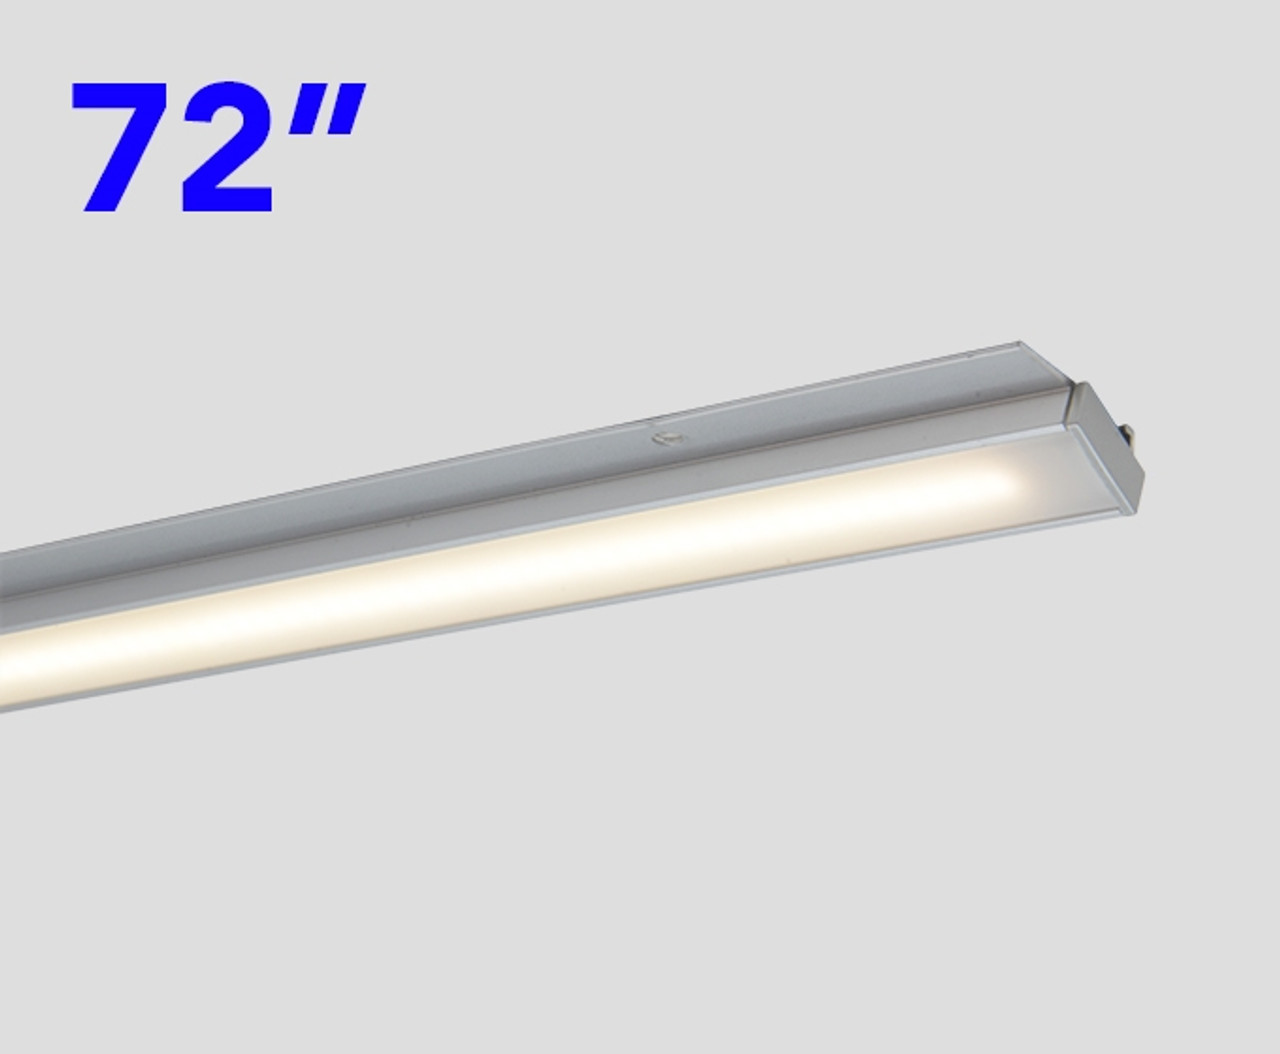 Intact Benadrukken Besmetten UL-Listed Ultra Slim and Bright 24VDC 72 Inch LED Under Cabinet Light Bar.  Dot-Free Linear LED Lighting for Cabinets and Closets.